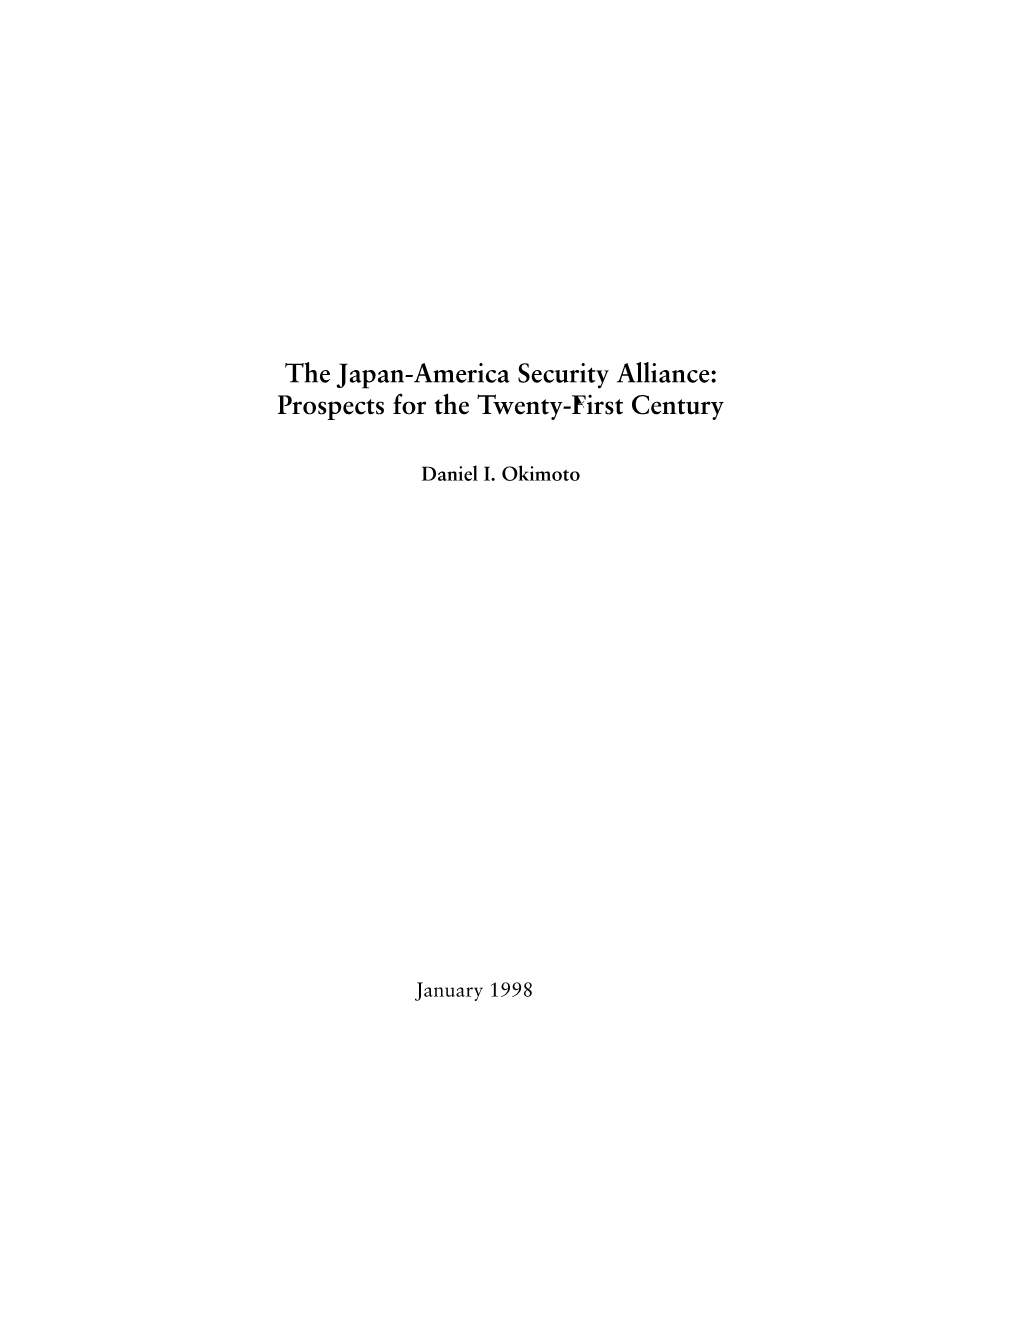 The Japan-America Security Alliance: Prospects for the Twenty-First Century